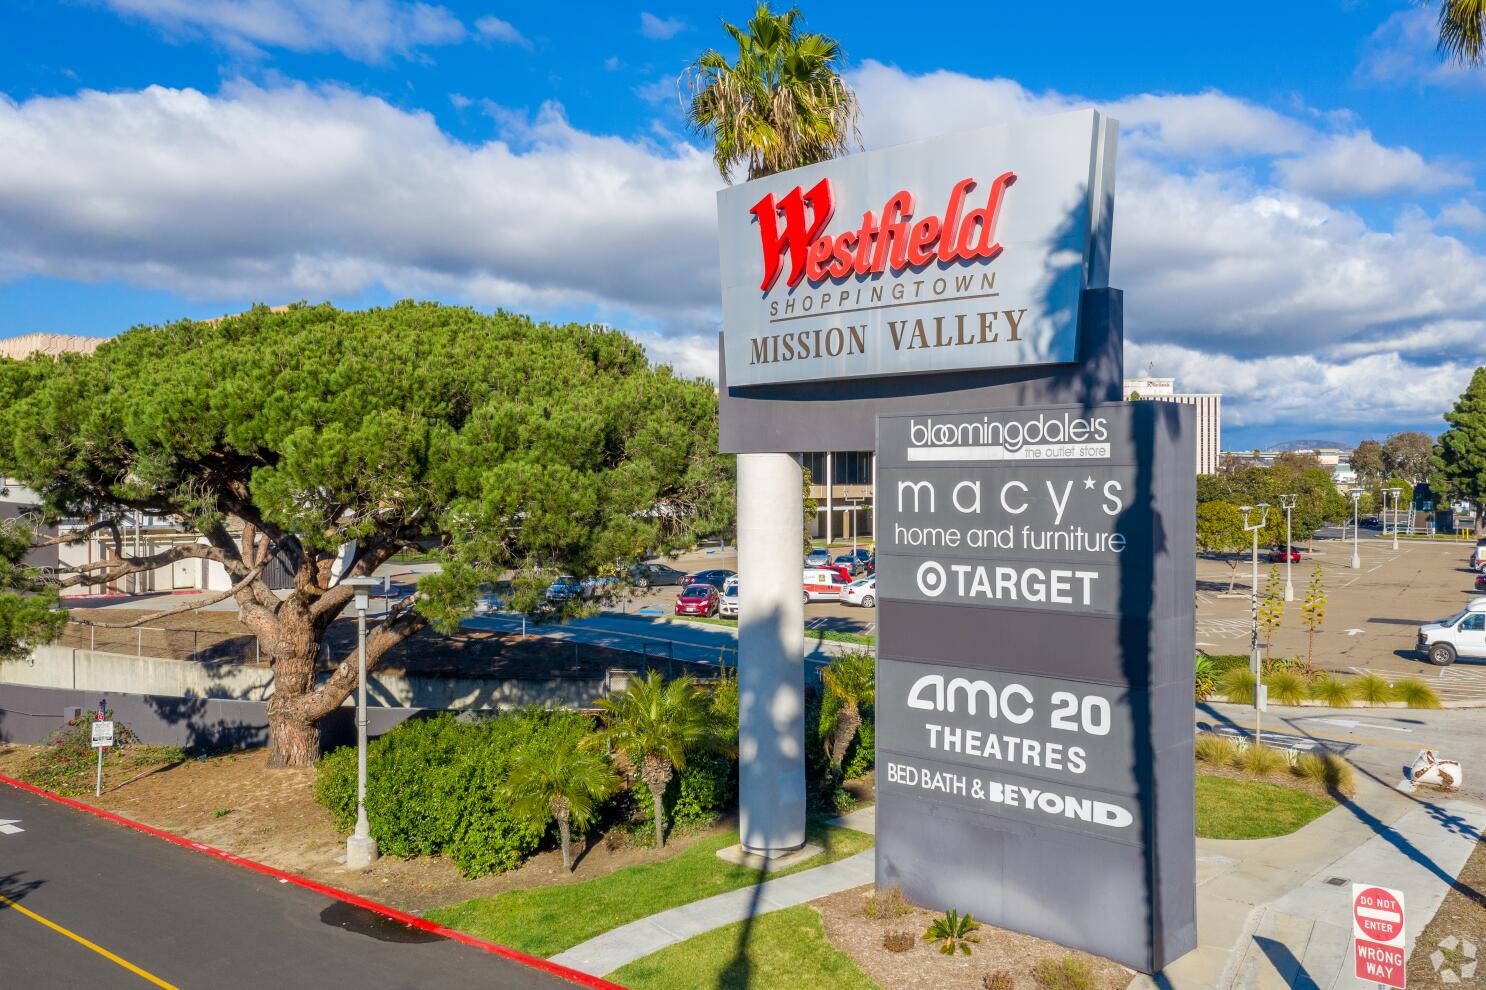 Westfield Mission Valley shopping centers sold for $290 million